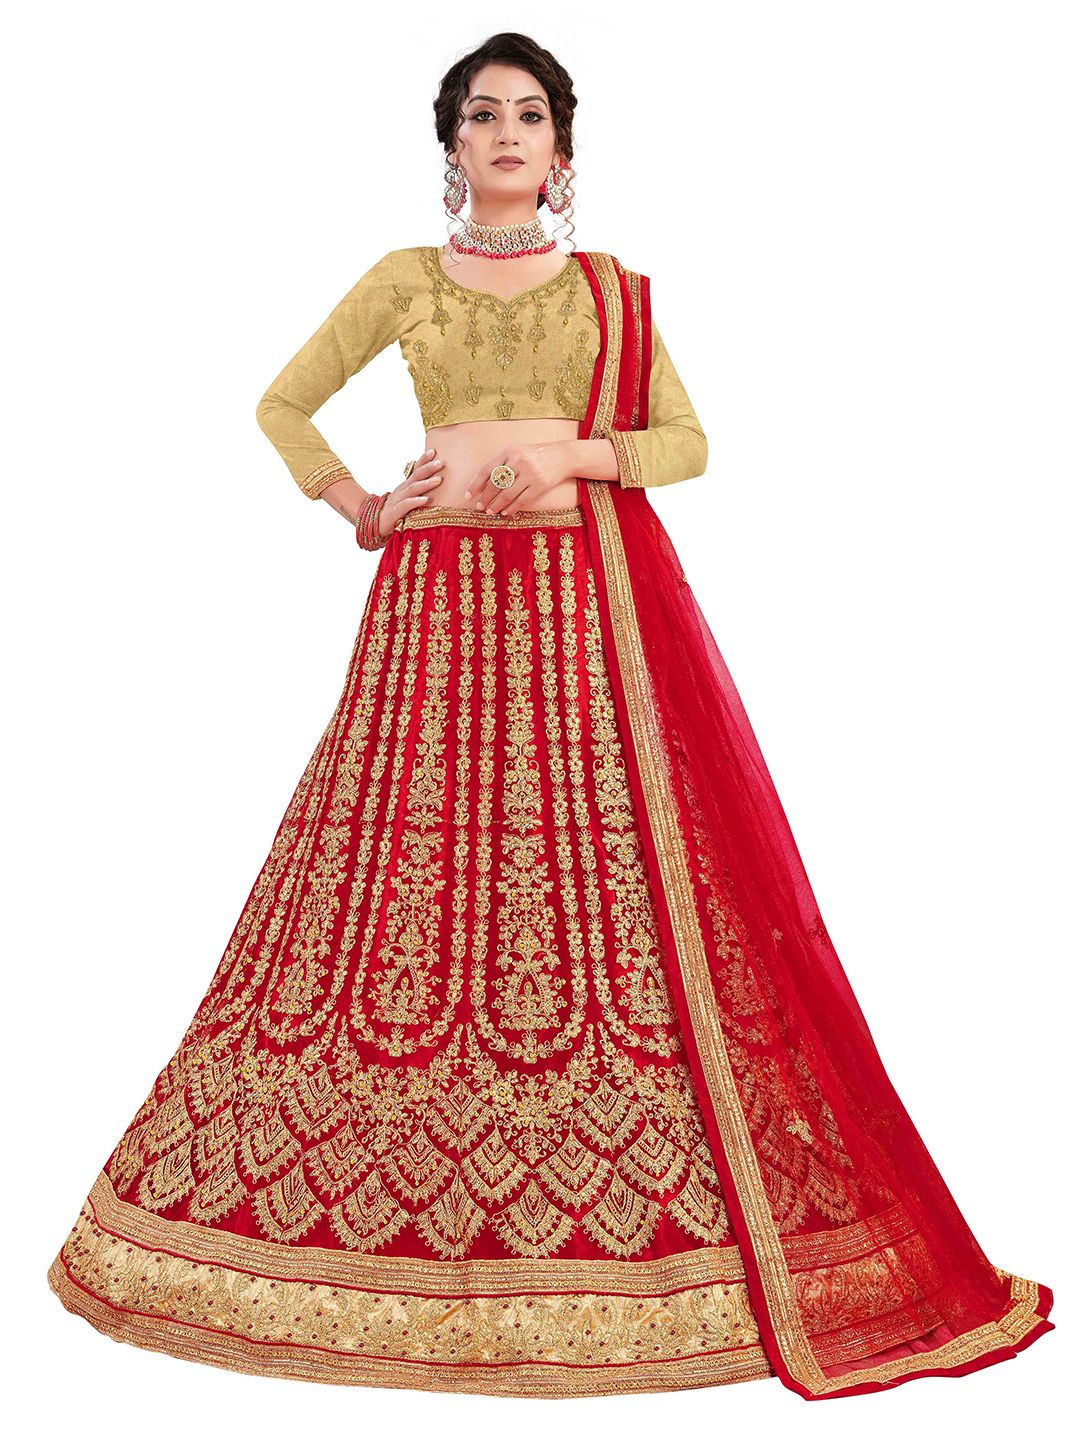 MANVAA Red & Beige Embroidered Thread Work Semi-Stitched Lehenga & Unstitched Blouse With Dupatta Price in India